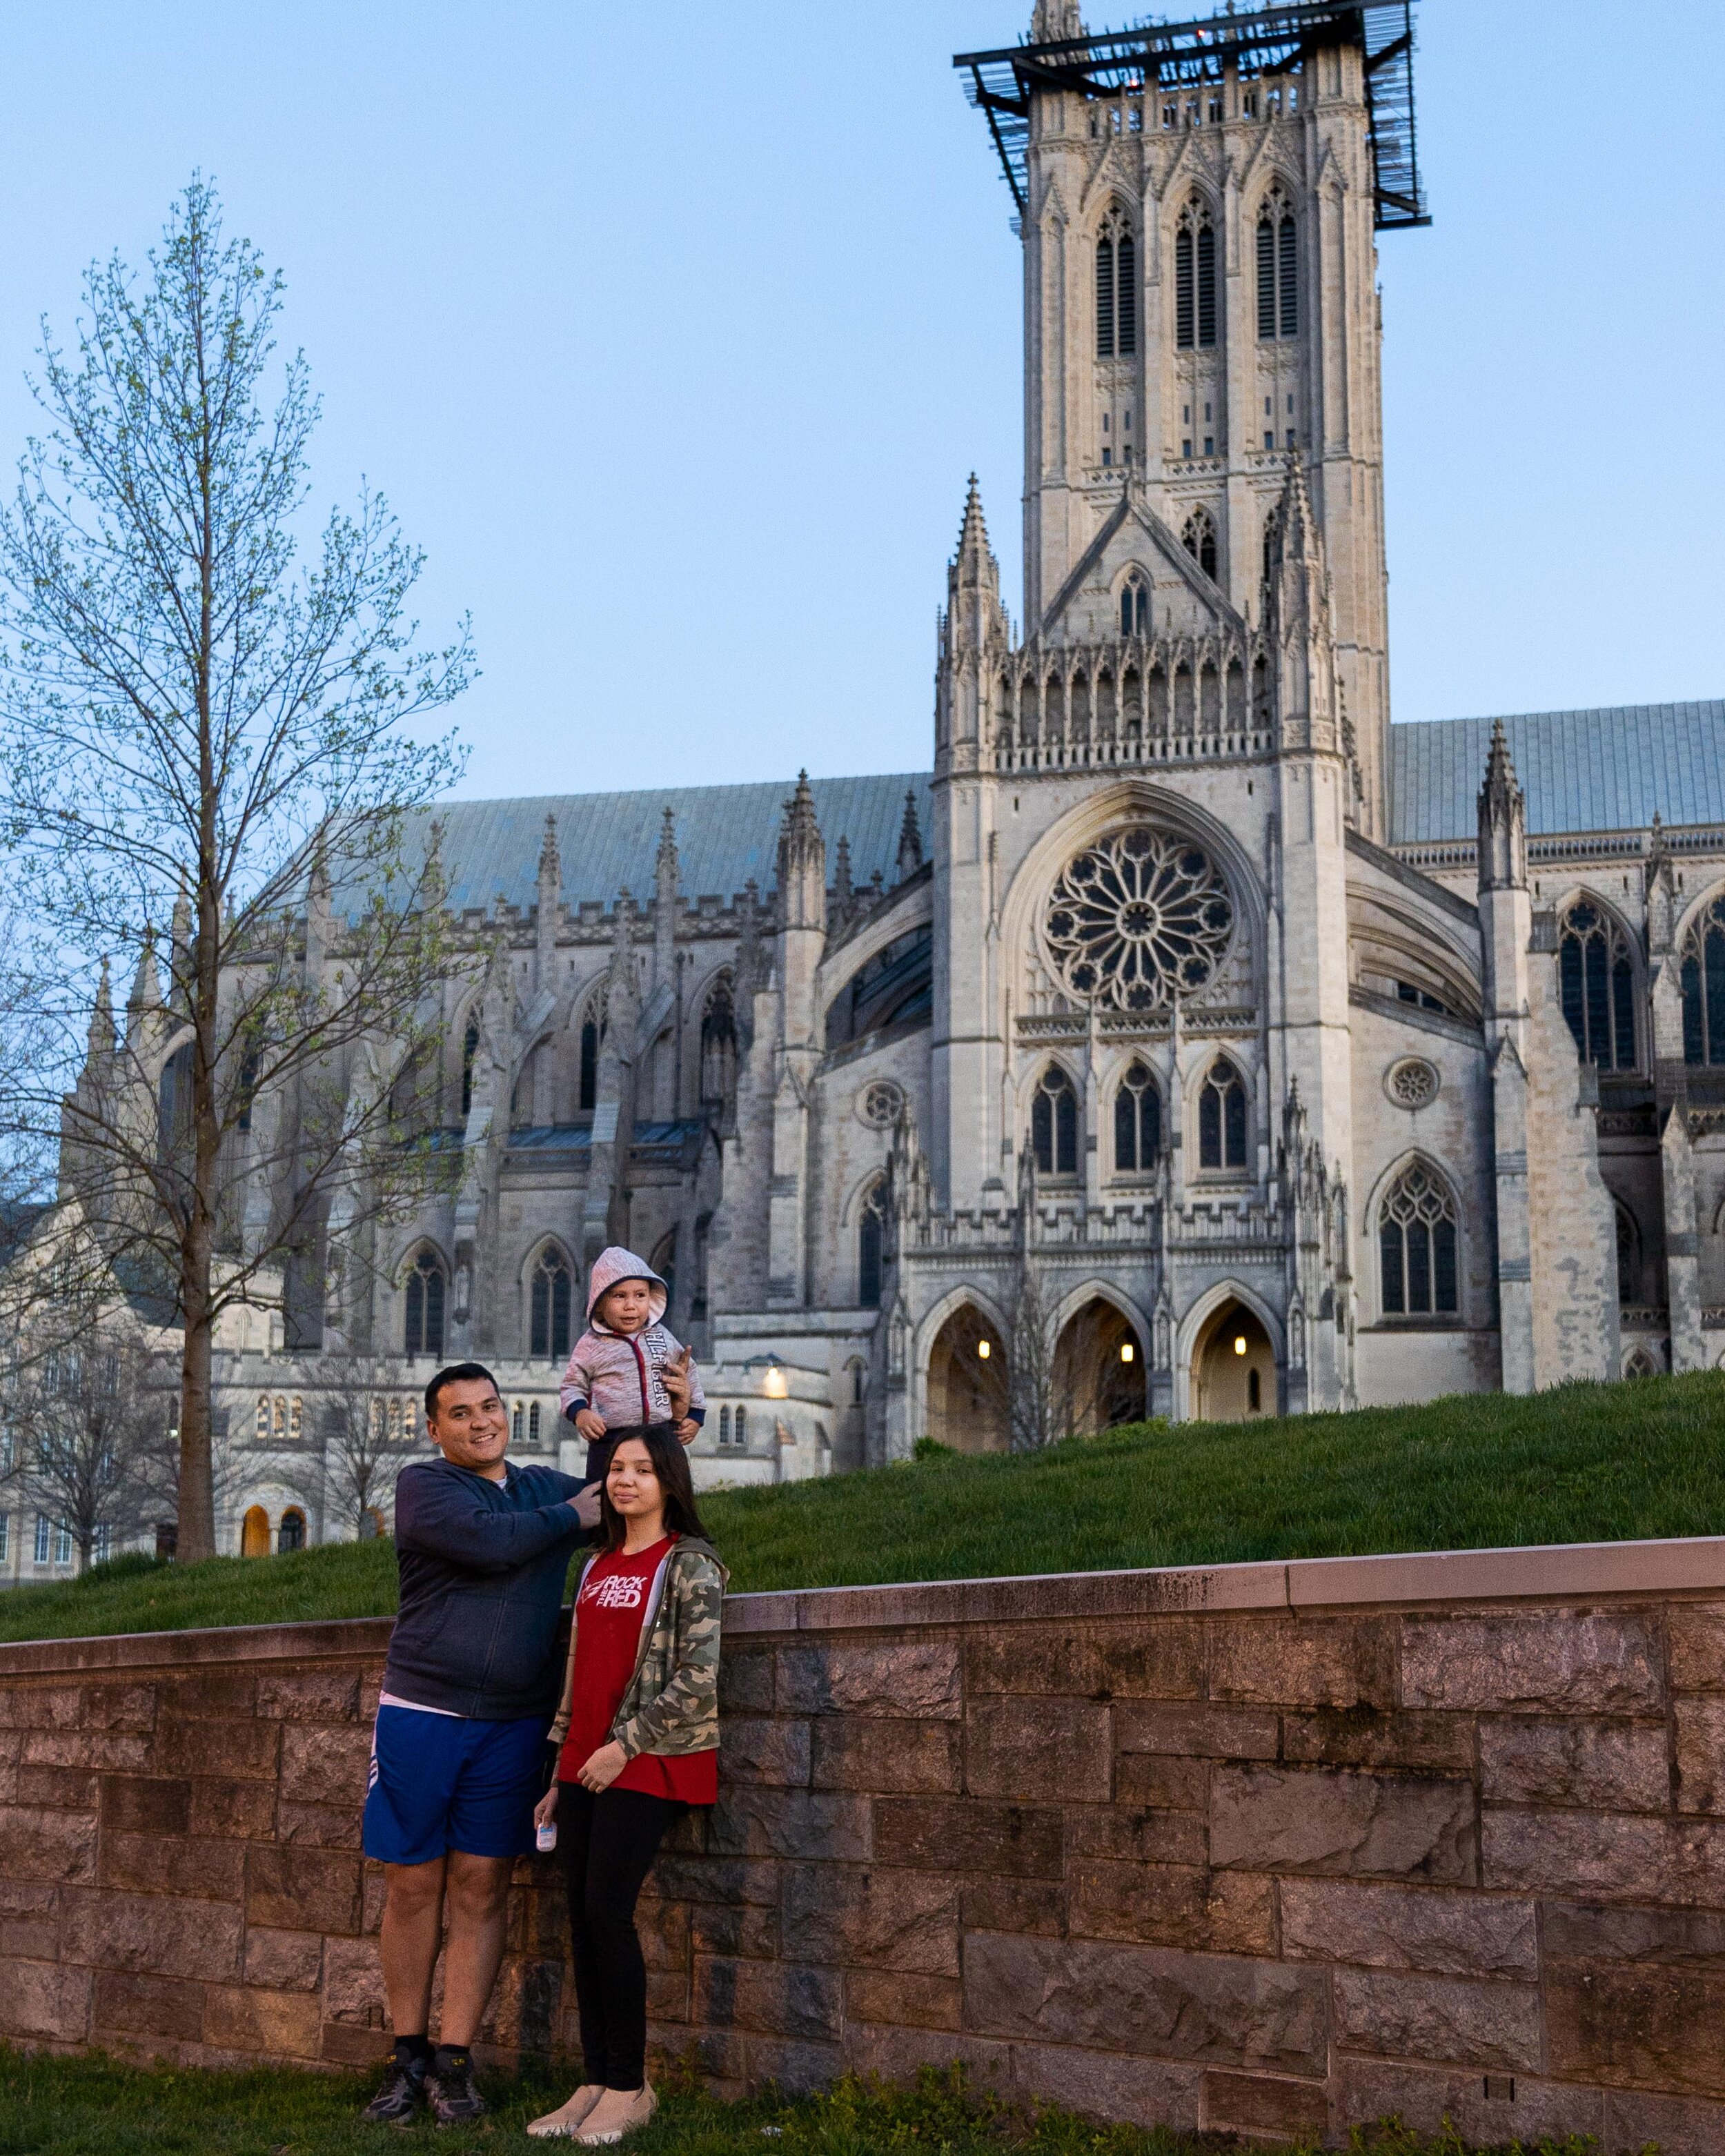  “I’m in landscaping. Mostly building, how do you call them? Heavy-duty fences for your property.” - Anonynous | 03/30/20 (National Cathedral, Washington D.C.) 